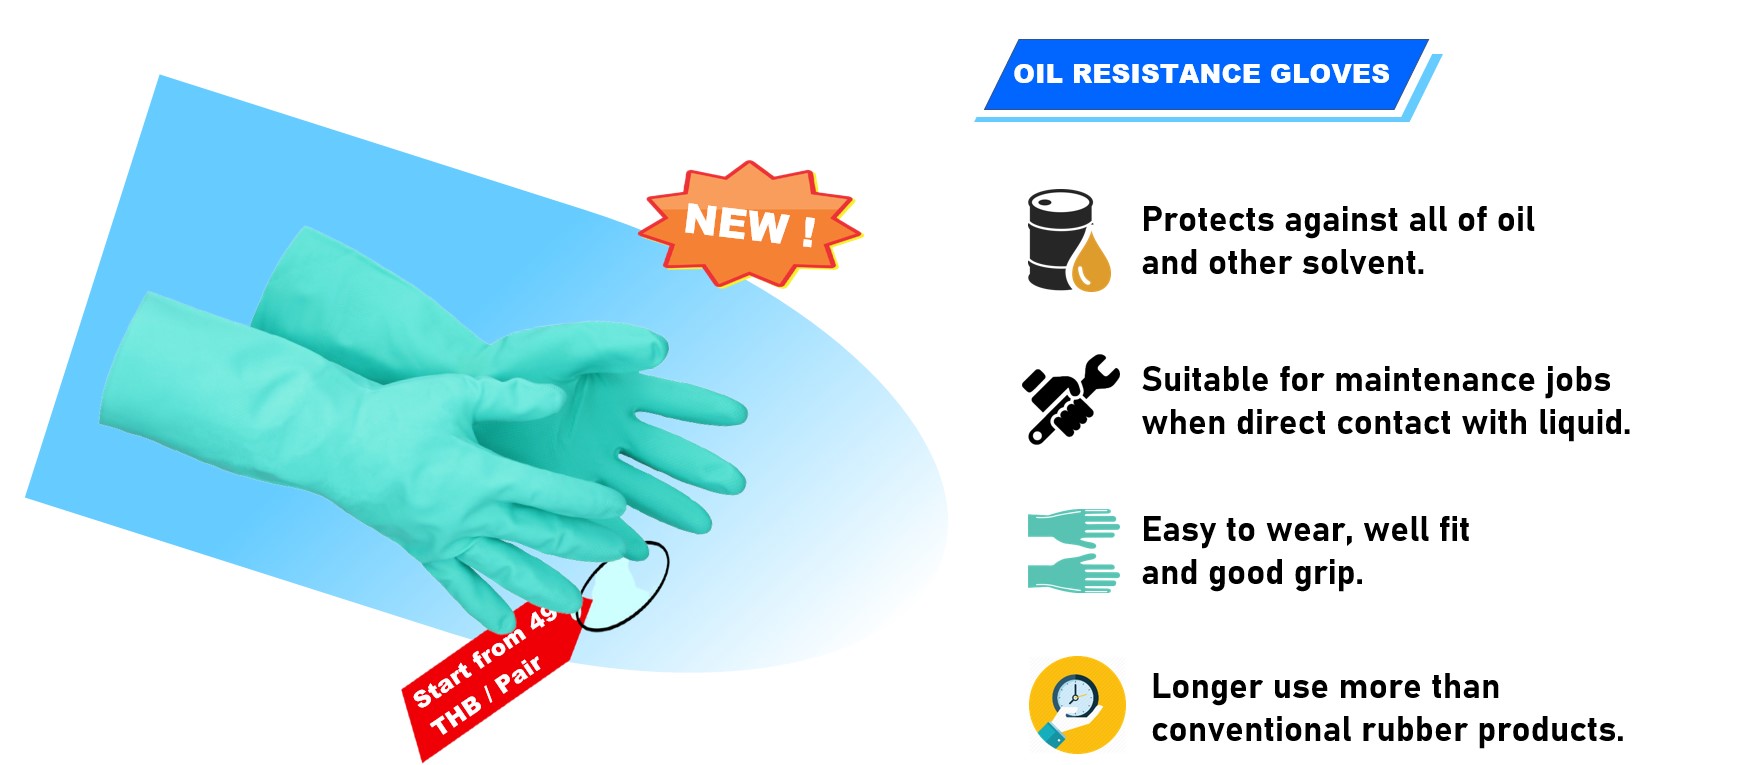 Product Specifications of Oil Resistance Gloves